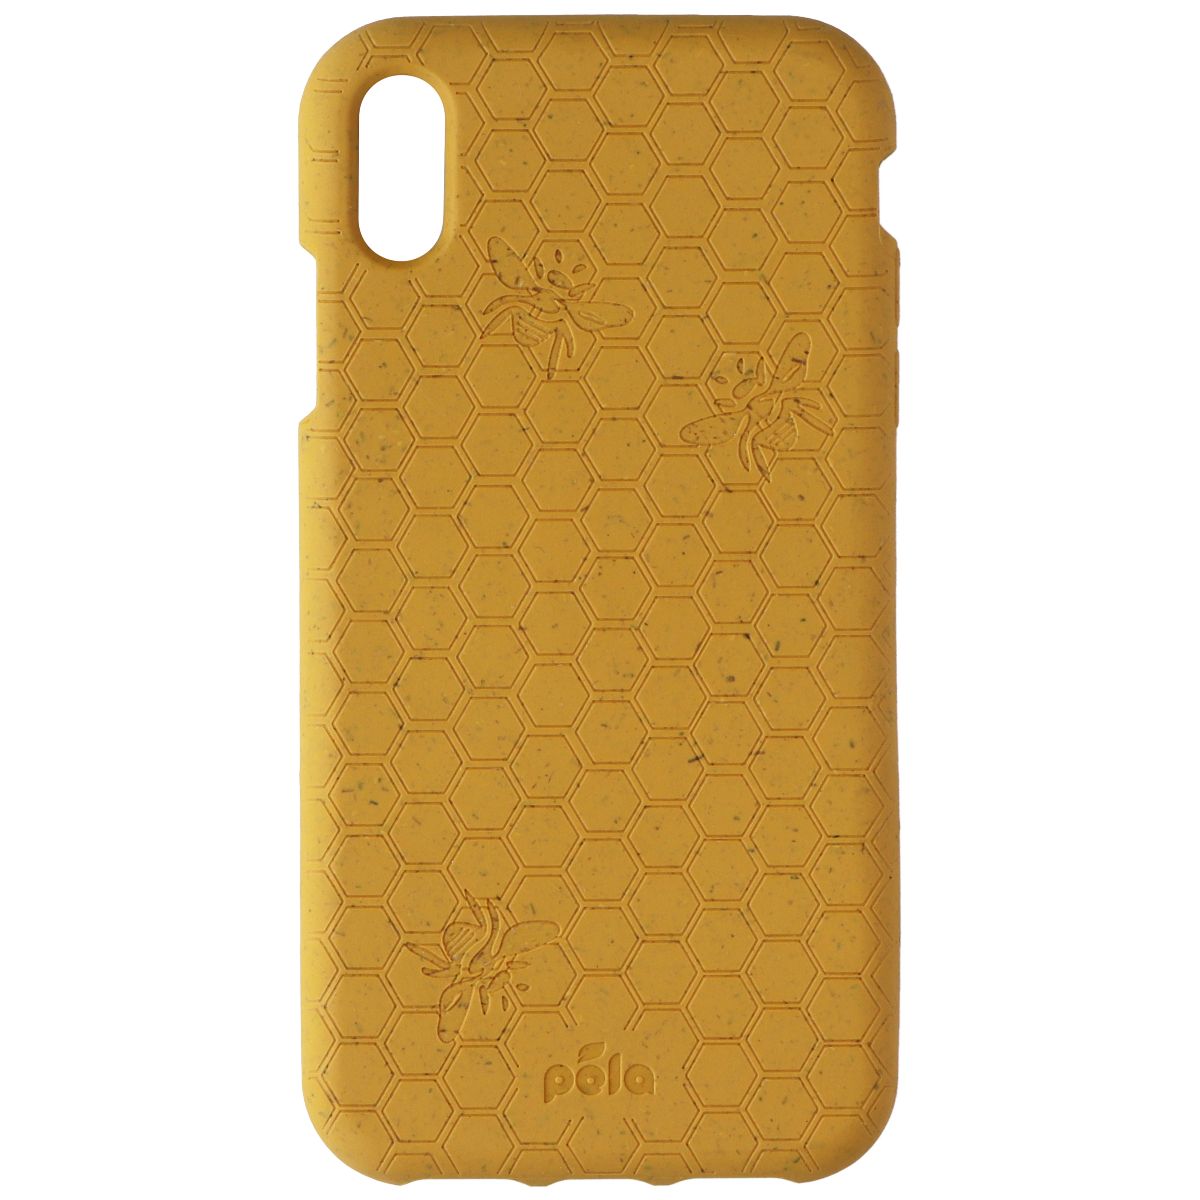 Pela Classic Series Flexible Case for Apple iPhone XS Max - Yellow